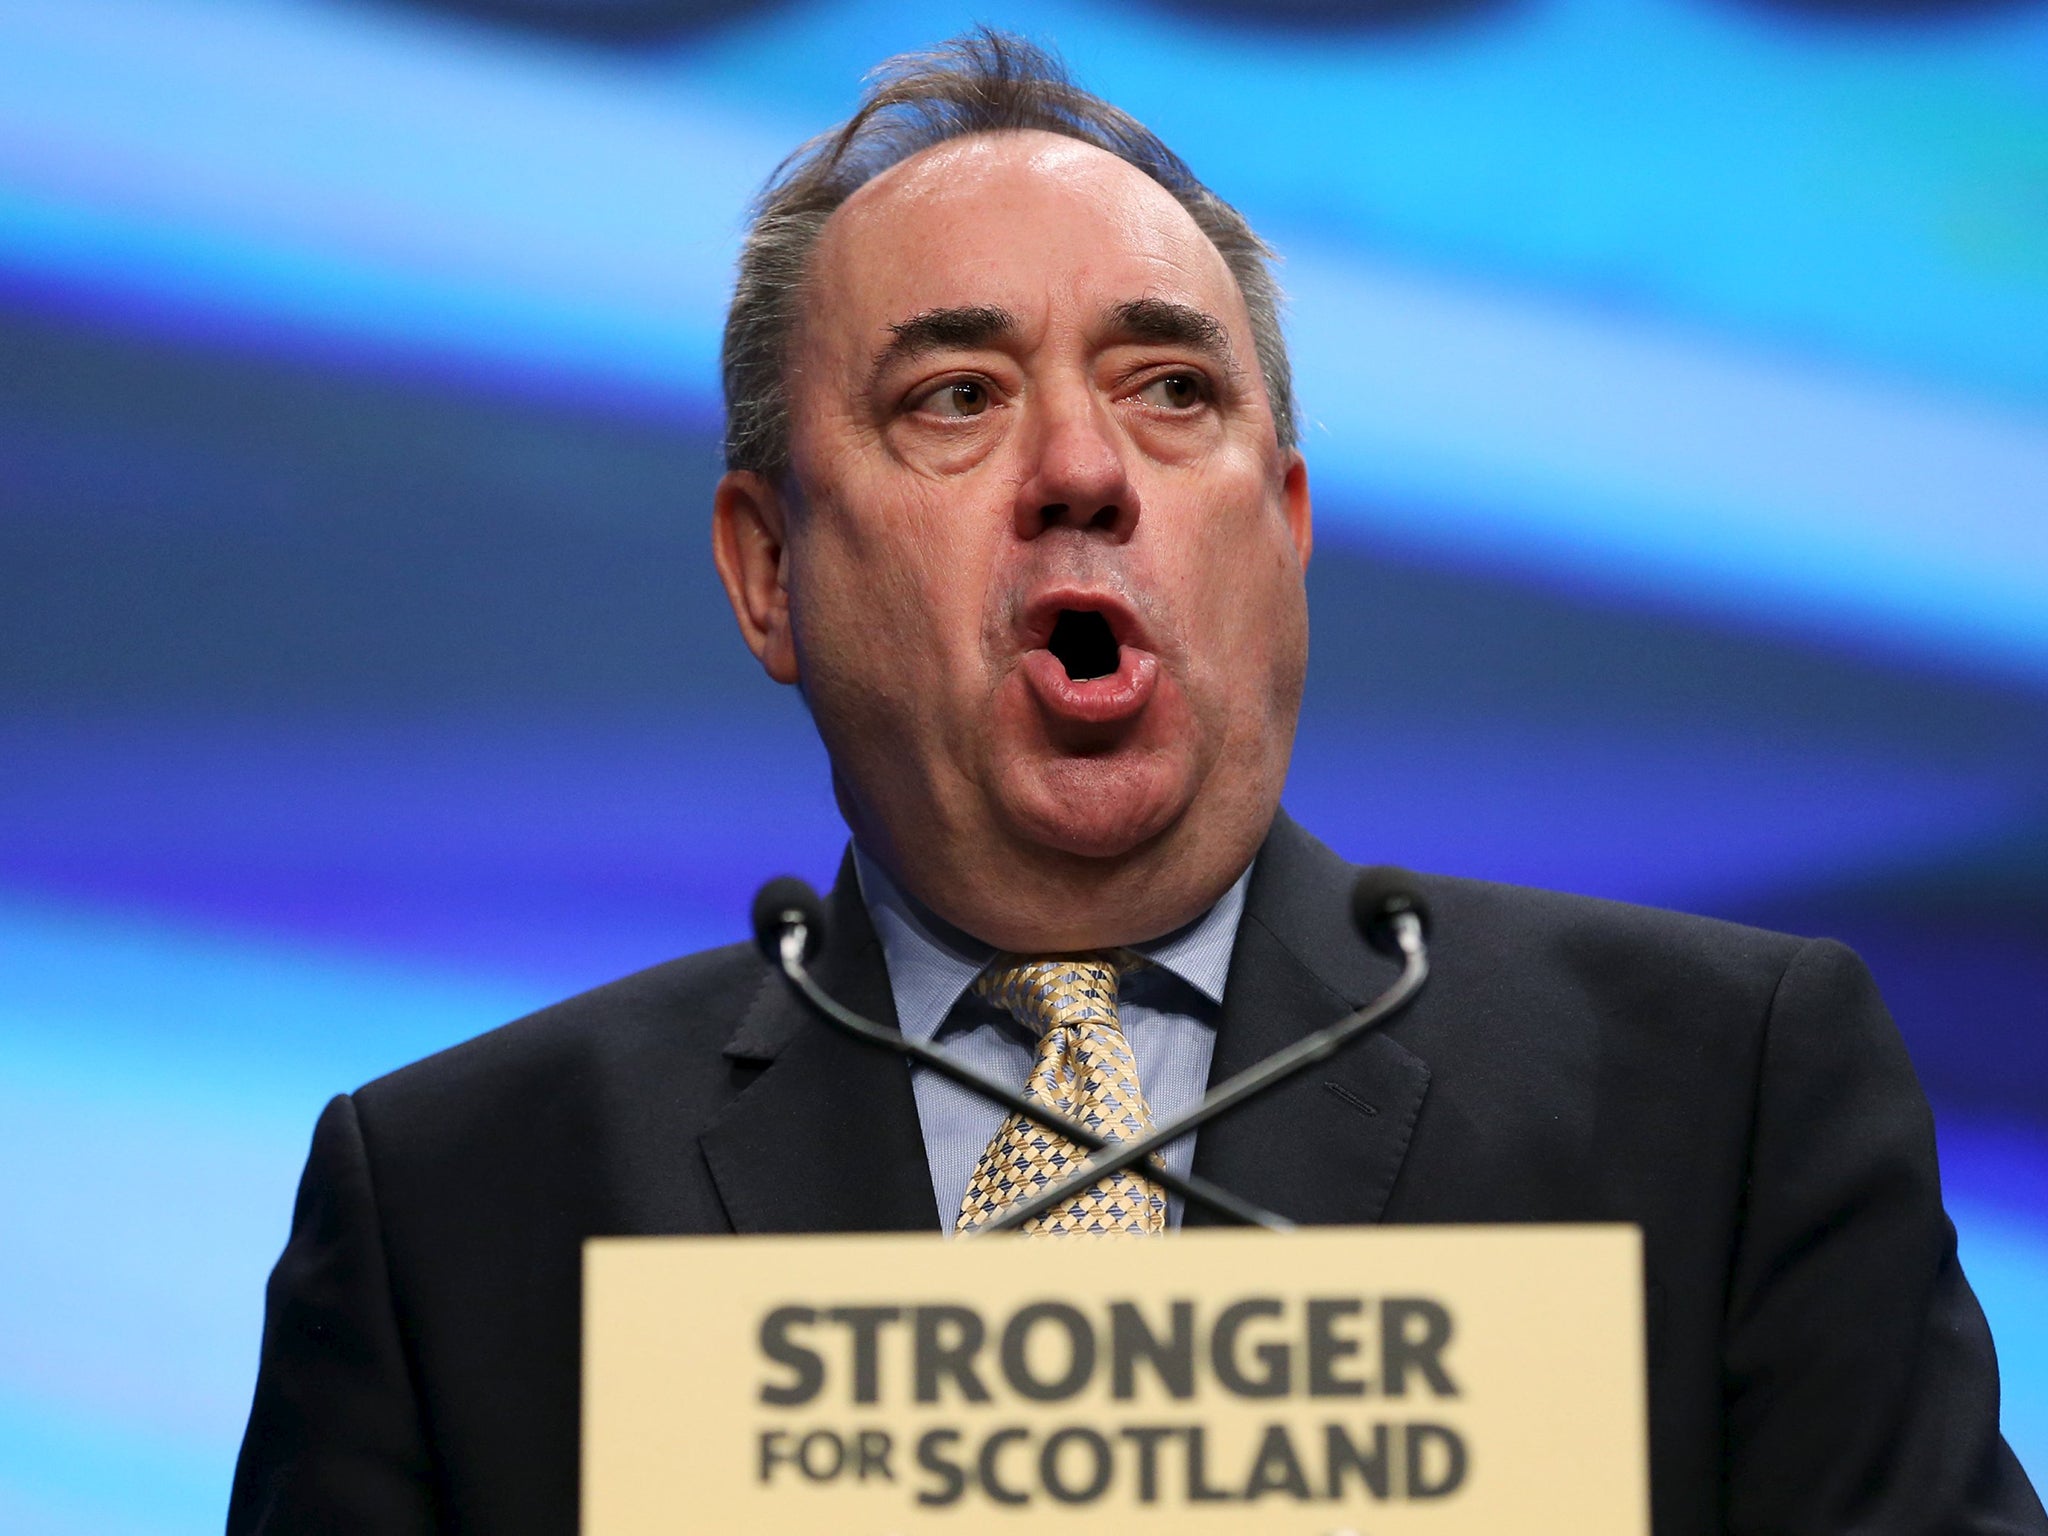 A minister played down Mr Salmond's comments on the occult